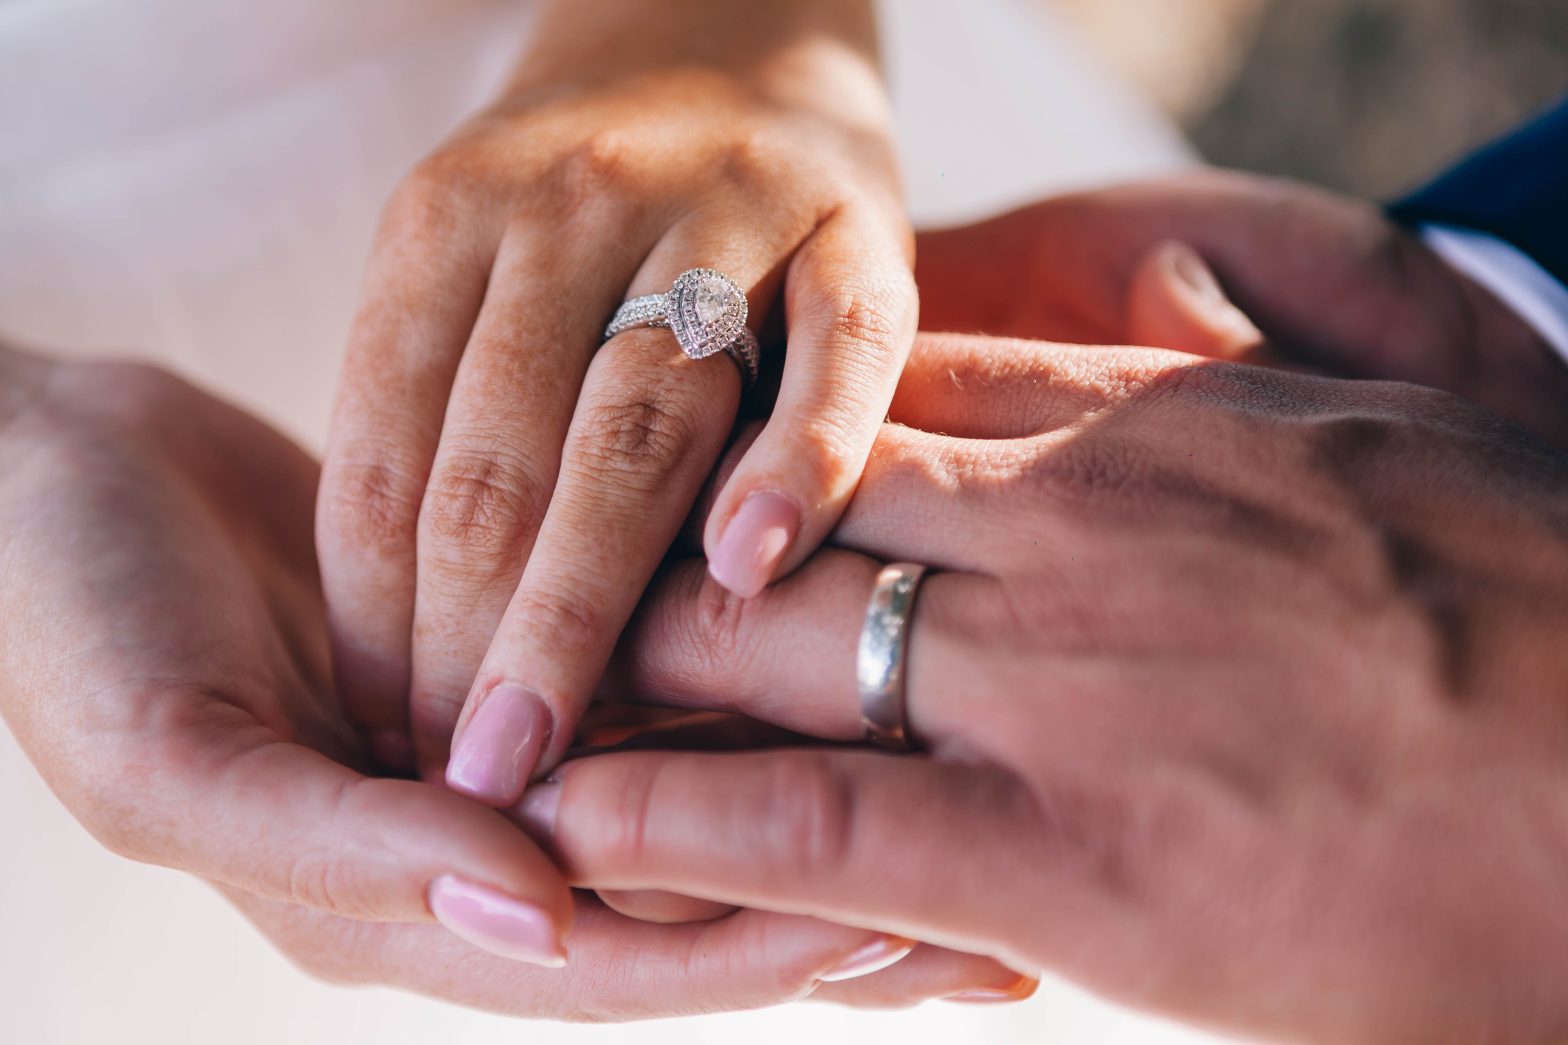 Why do couples renew their vows?